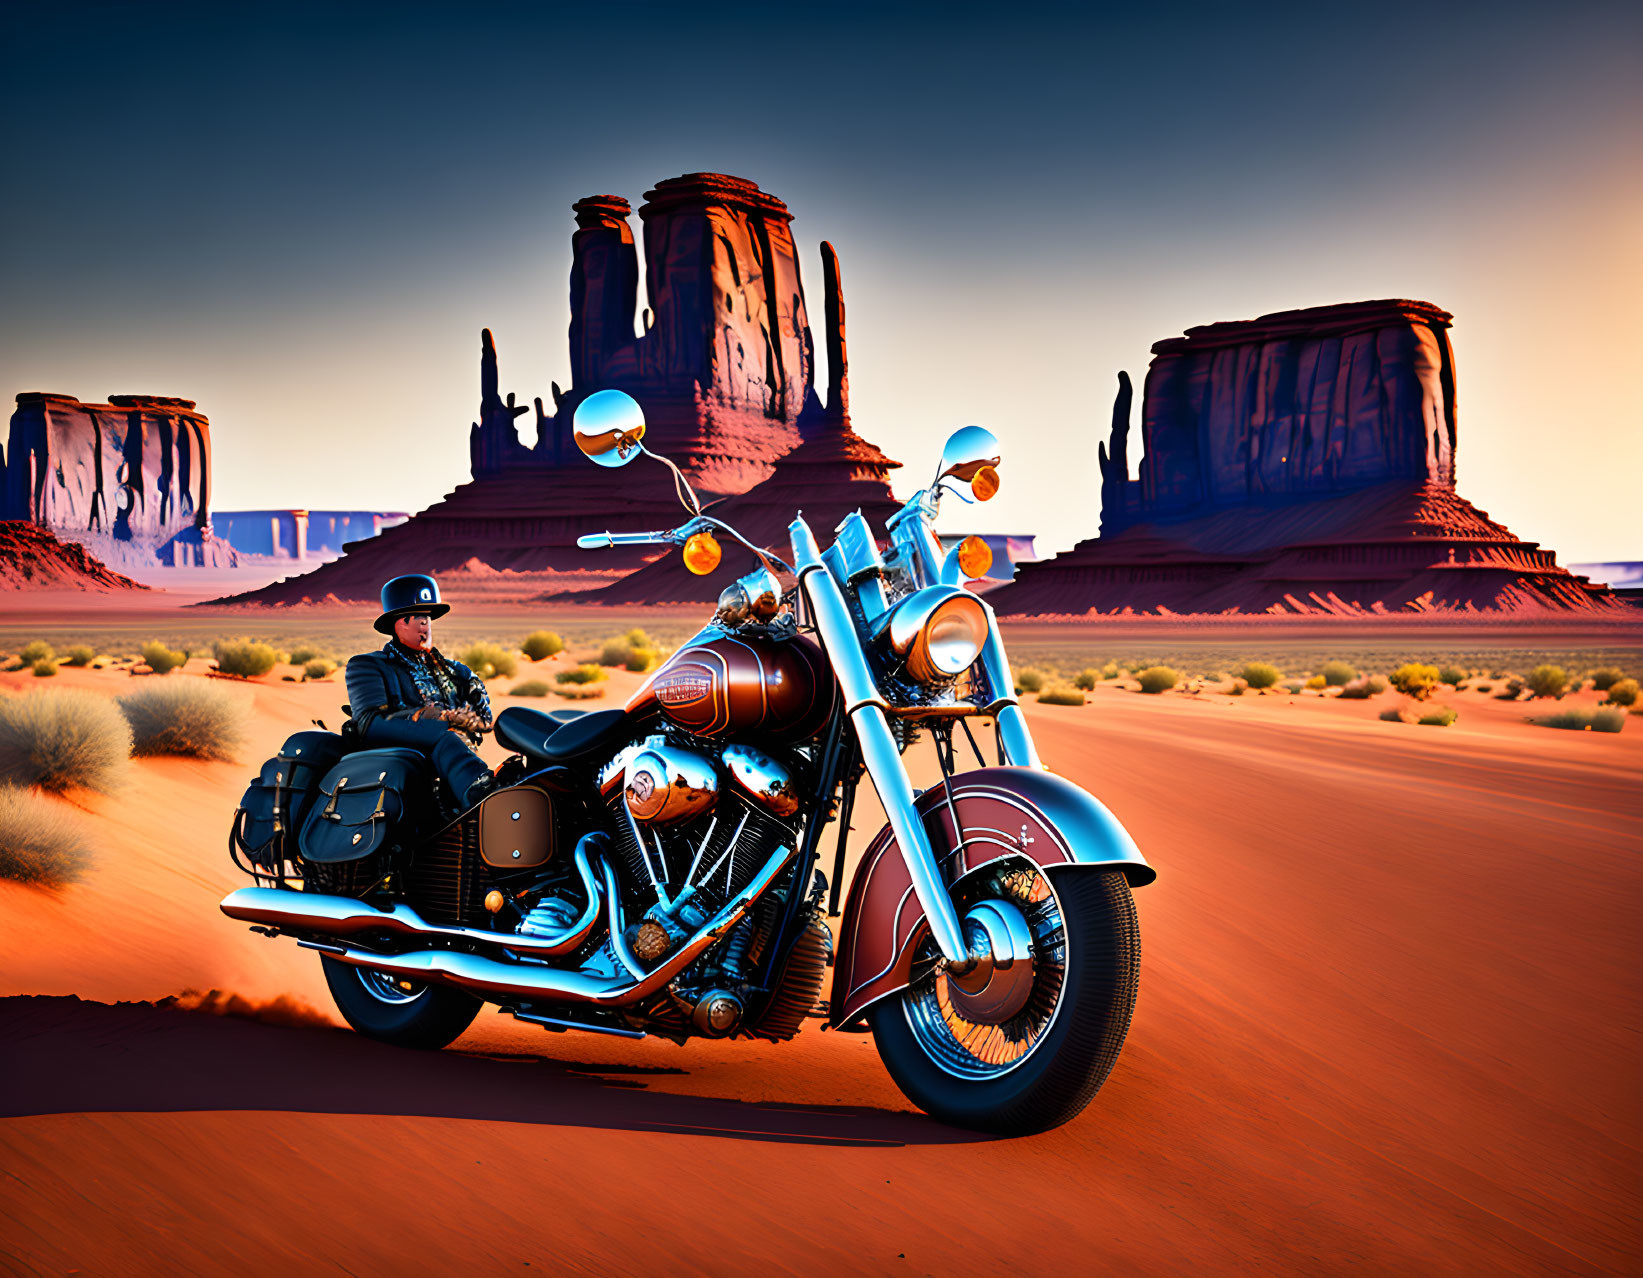 Person on Classic Motorcycle in Monument Valley Surrounded by Sandstone Buttes